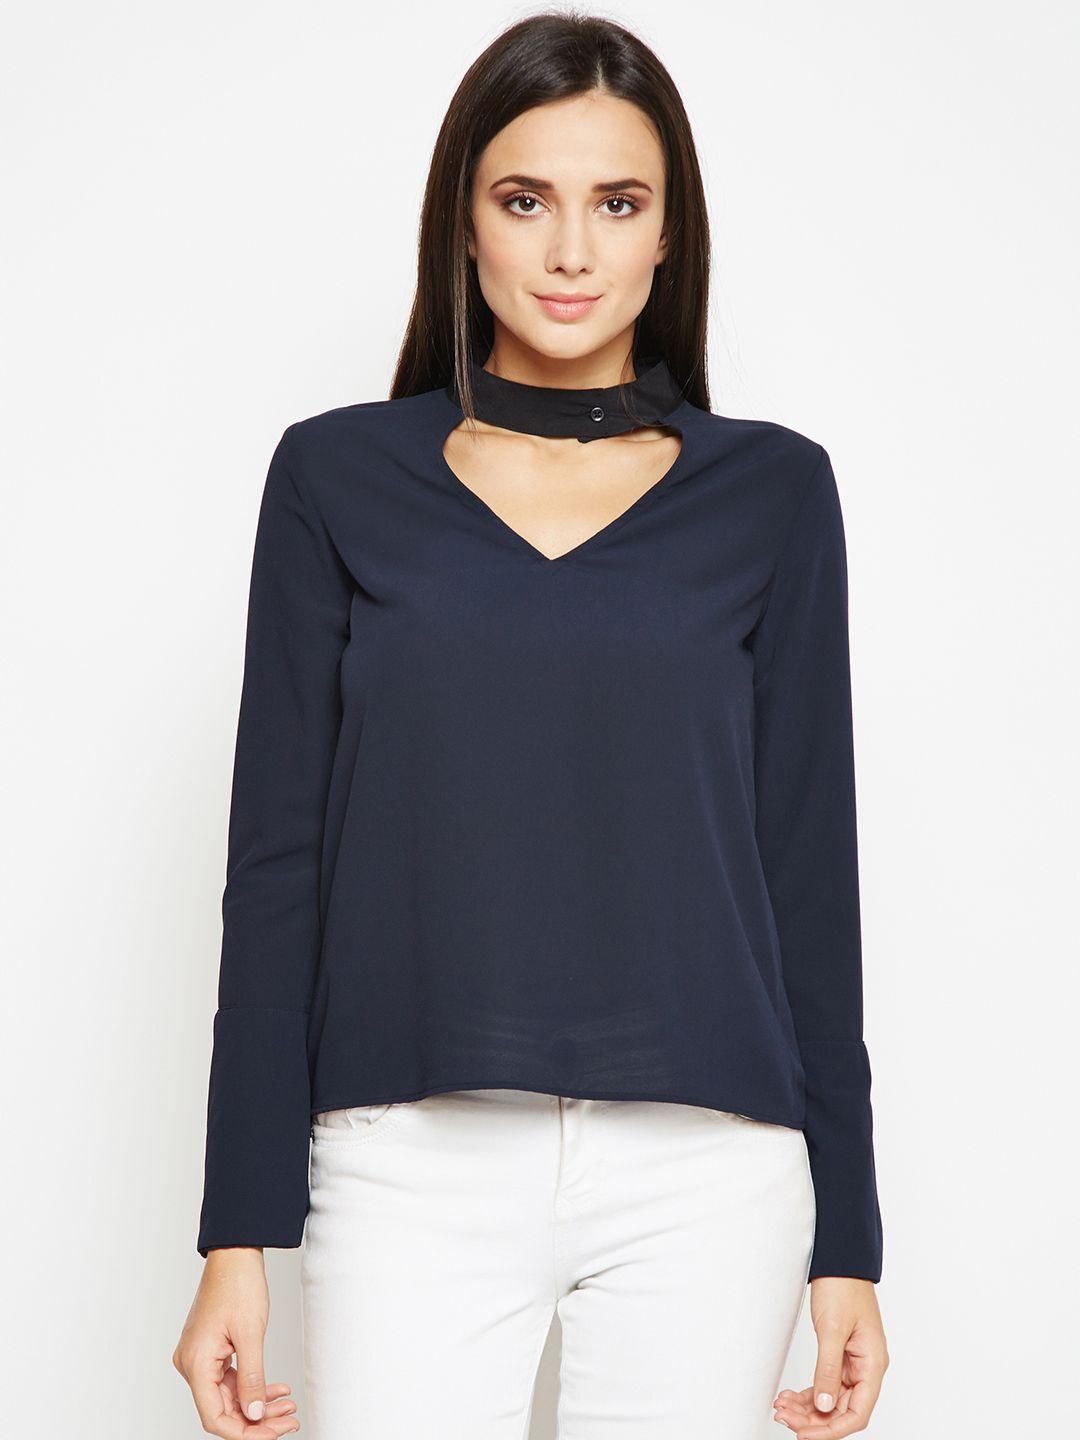 oxolloxo women navy blue solid top